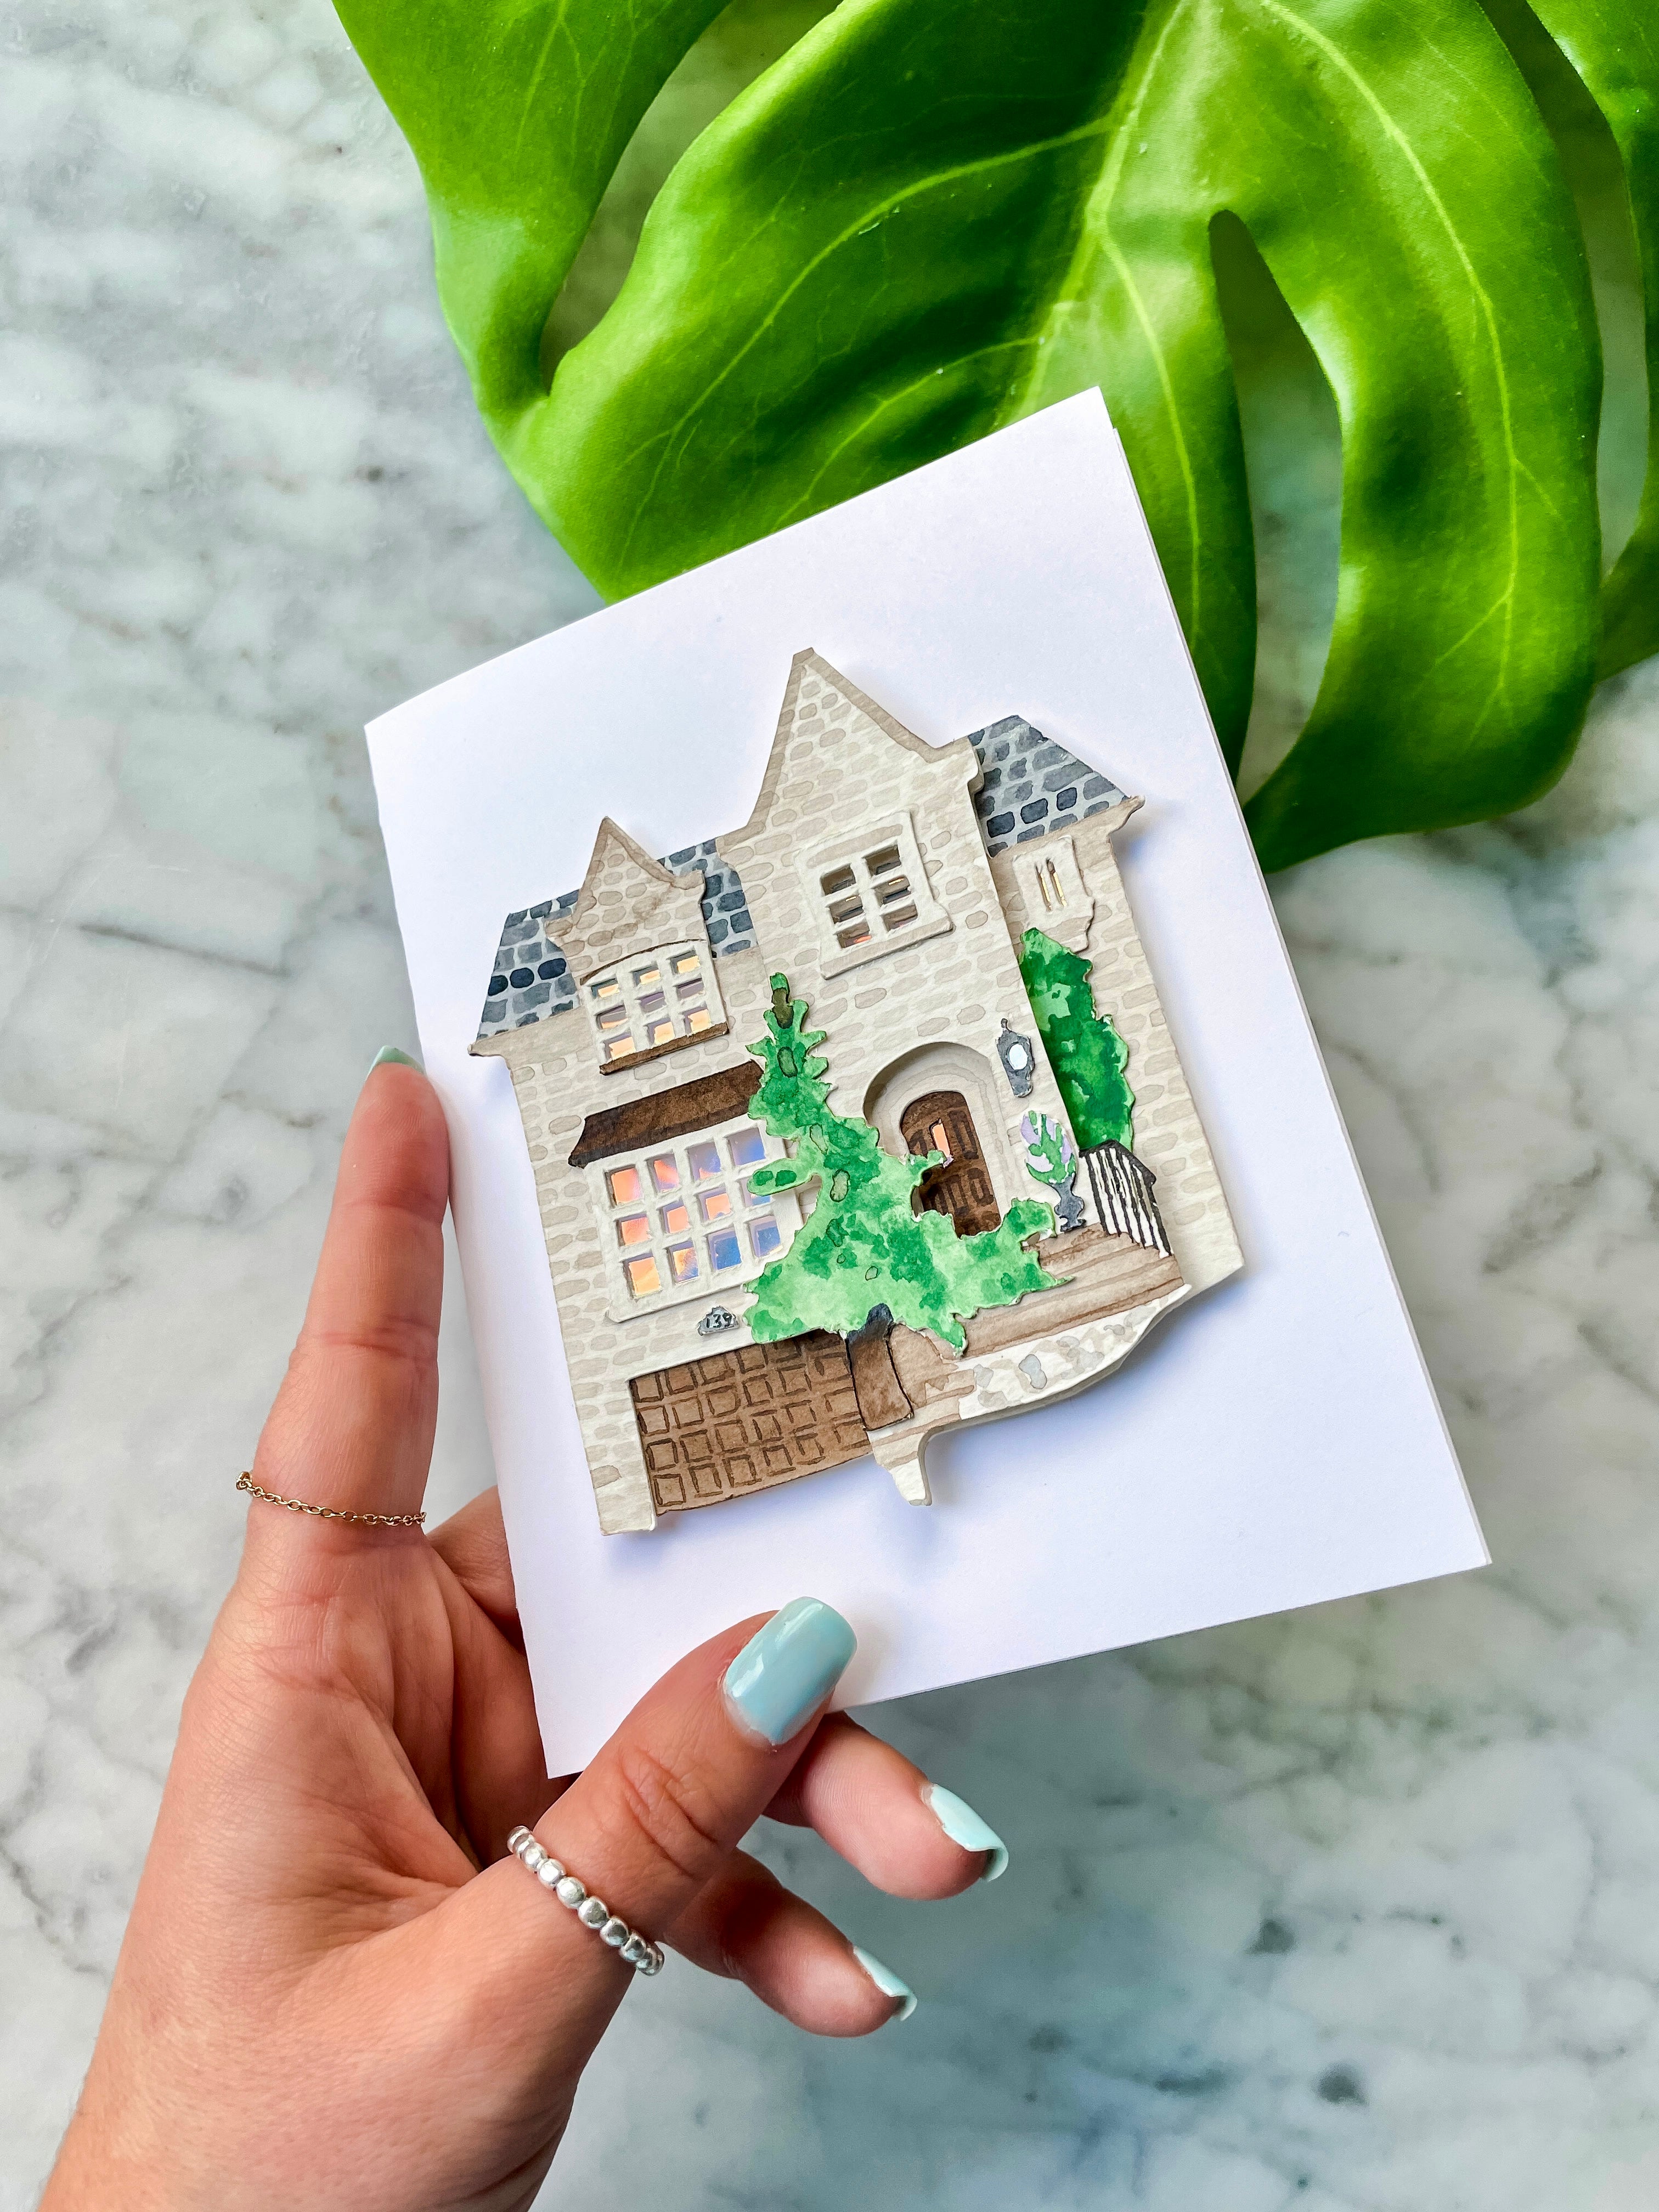 Custom made cards. Custom greeting cards. Handmade greeting cards. House portrait. Housewarming gift. Housewarming card for real estate clients.